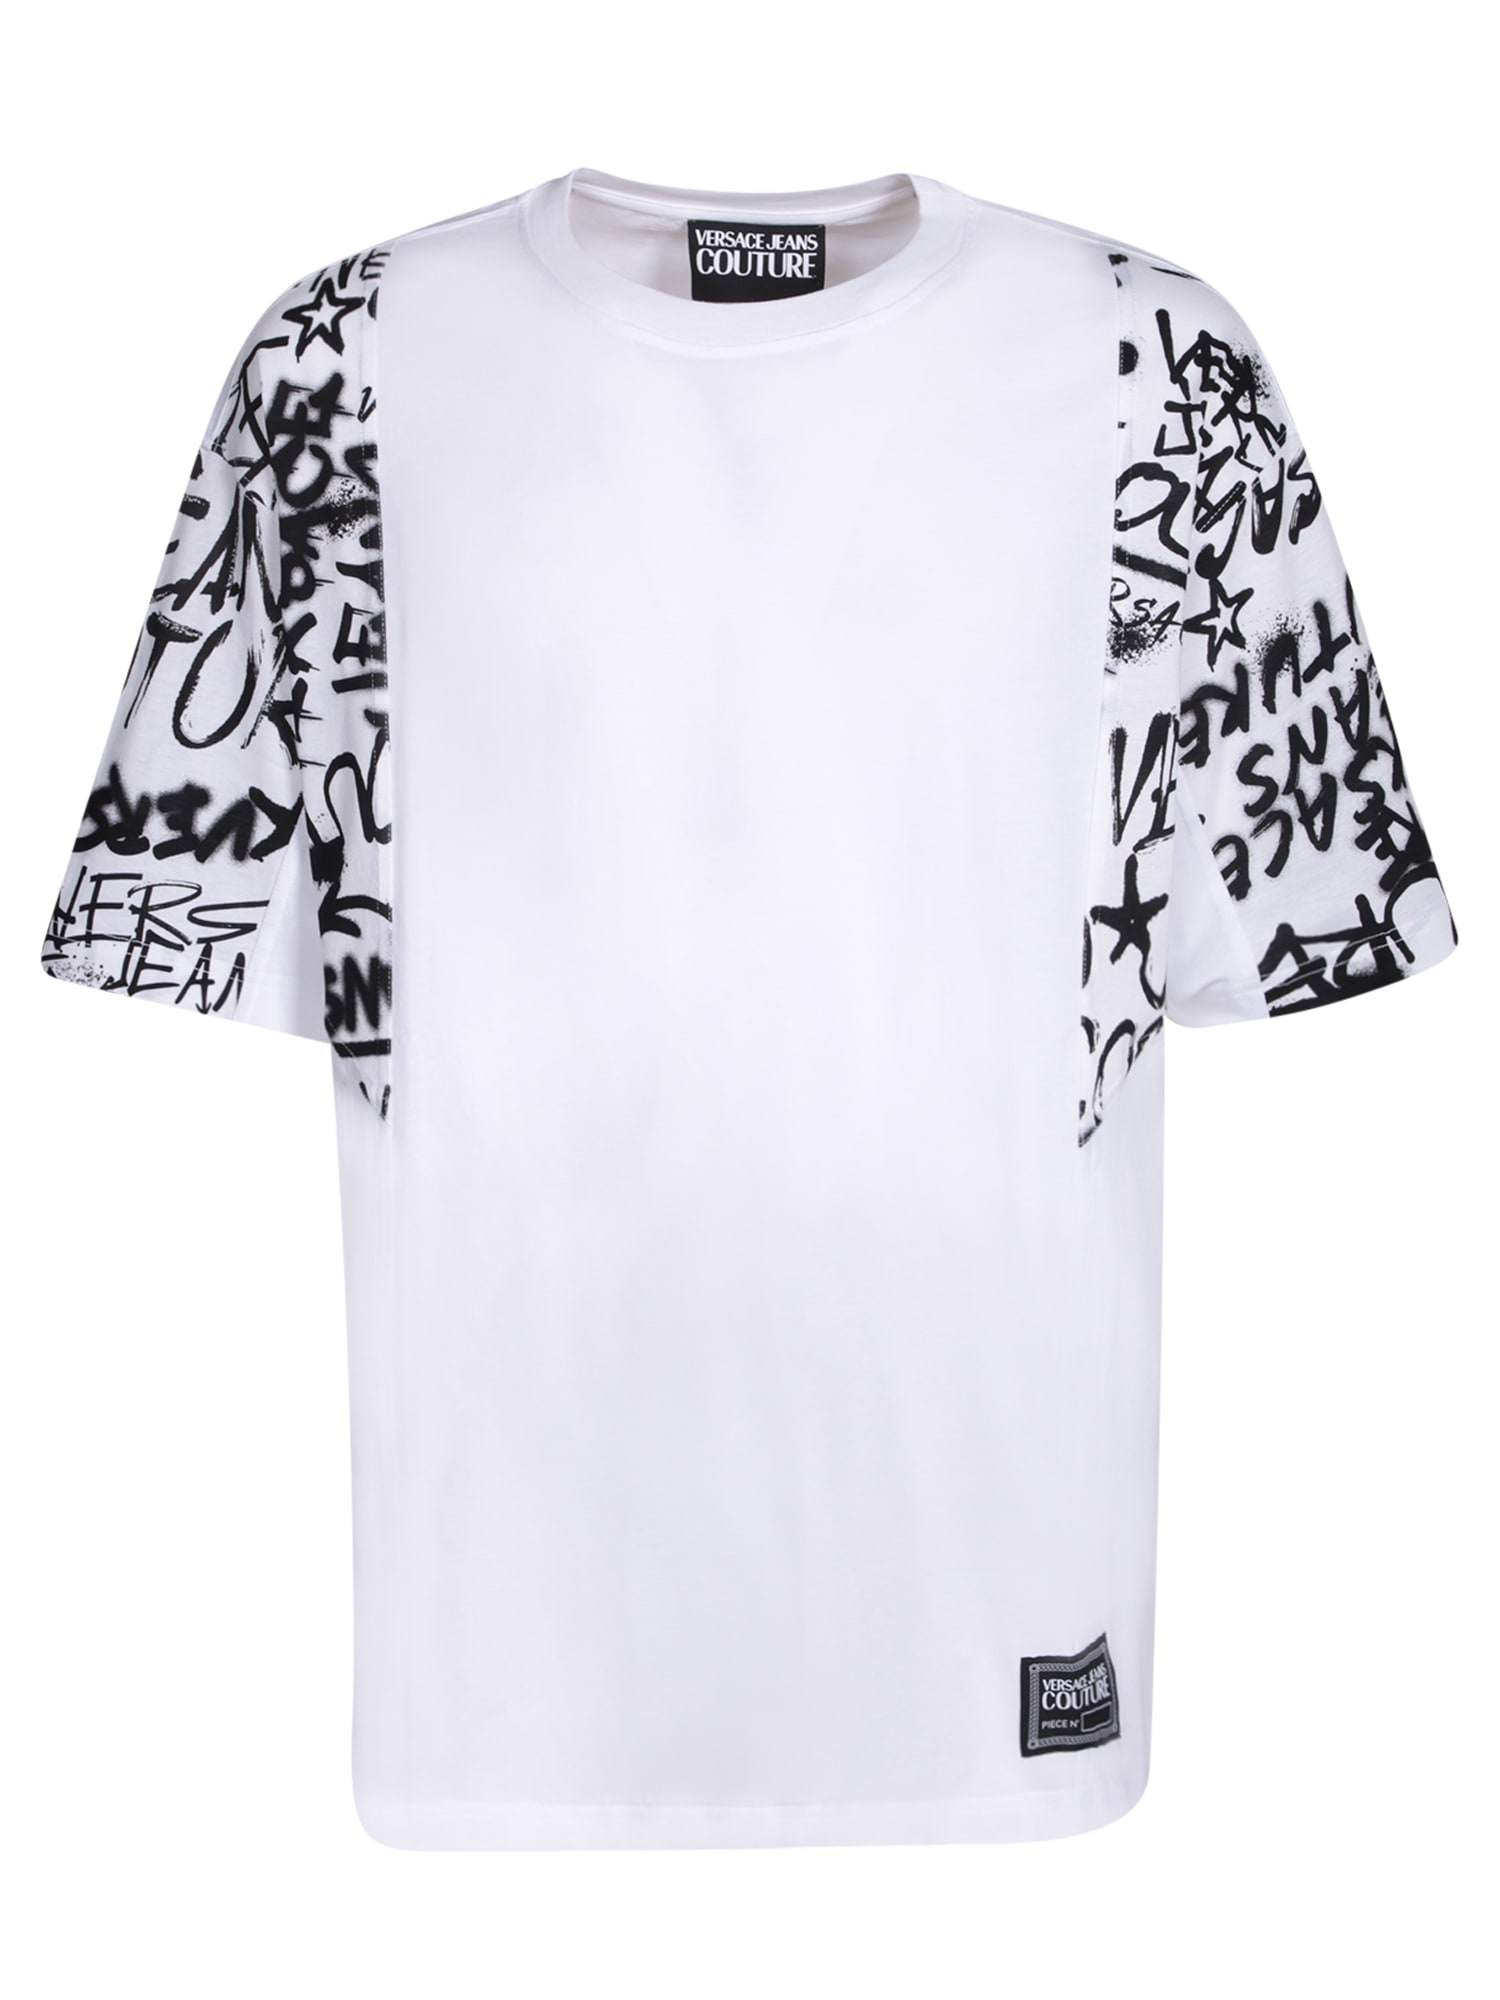 Versace Jeans Couture Graffiti Print White T-shirt By